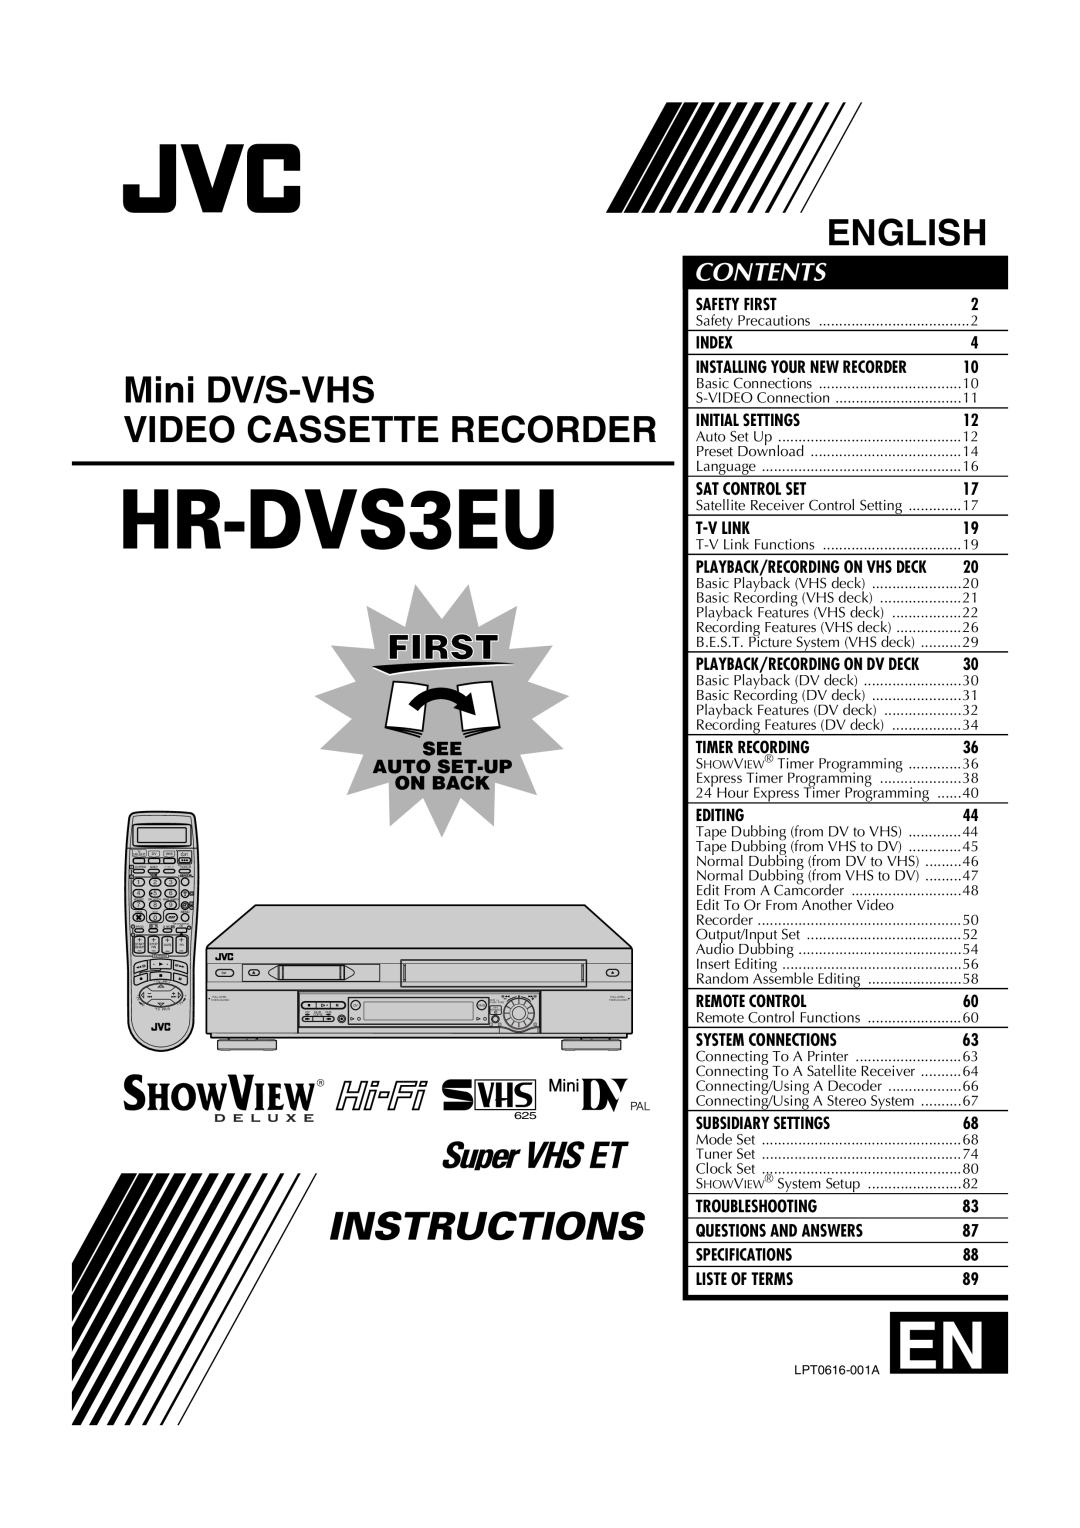 JVC LPT0616-001A specifications Mini DV/S-VHS VIDEO CASSETTE RECORDER, English, Contents, Safety First, Index, T-V Link 